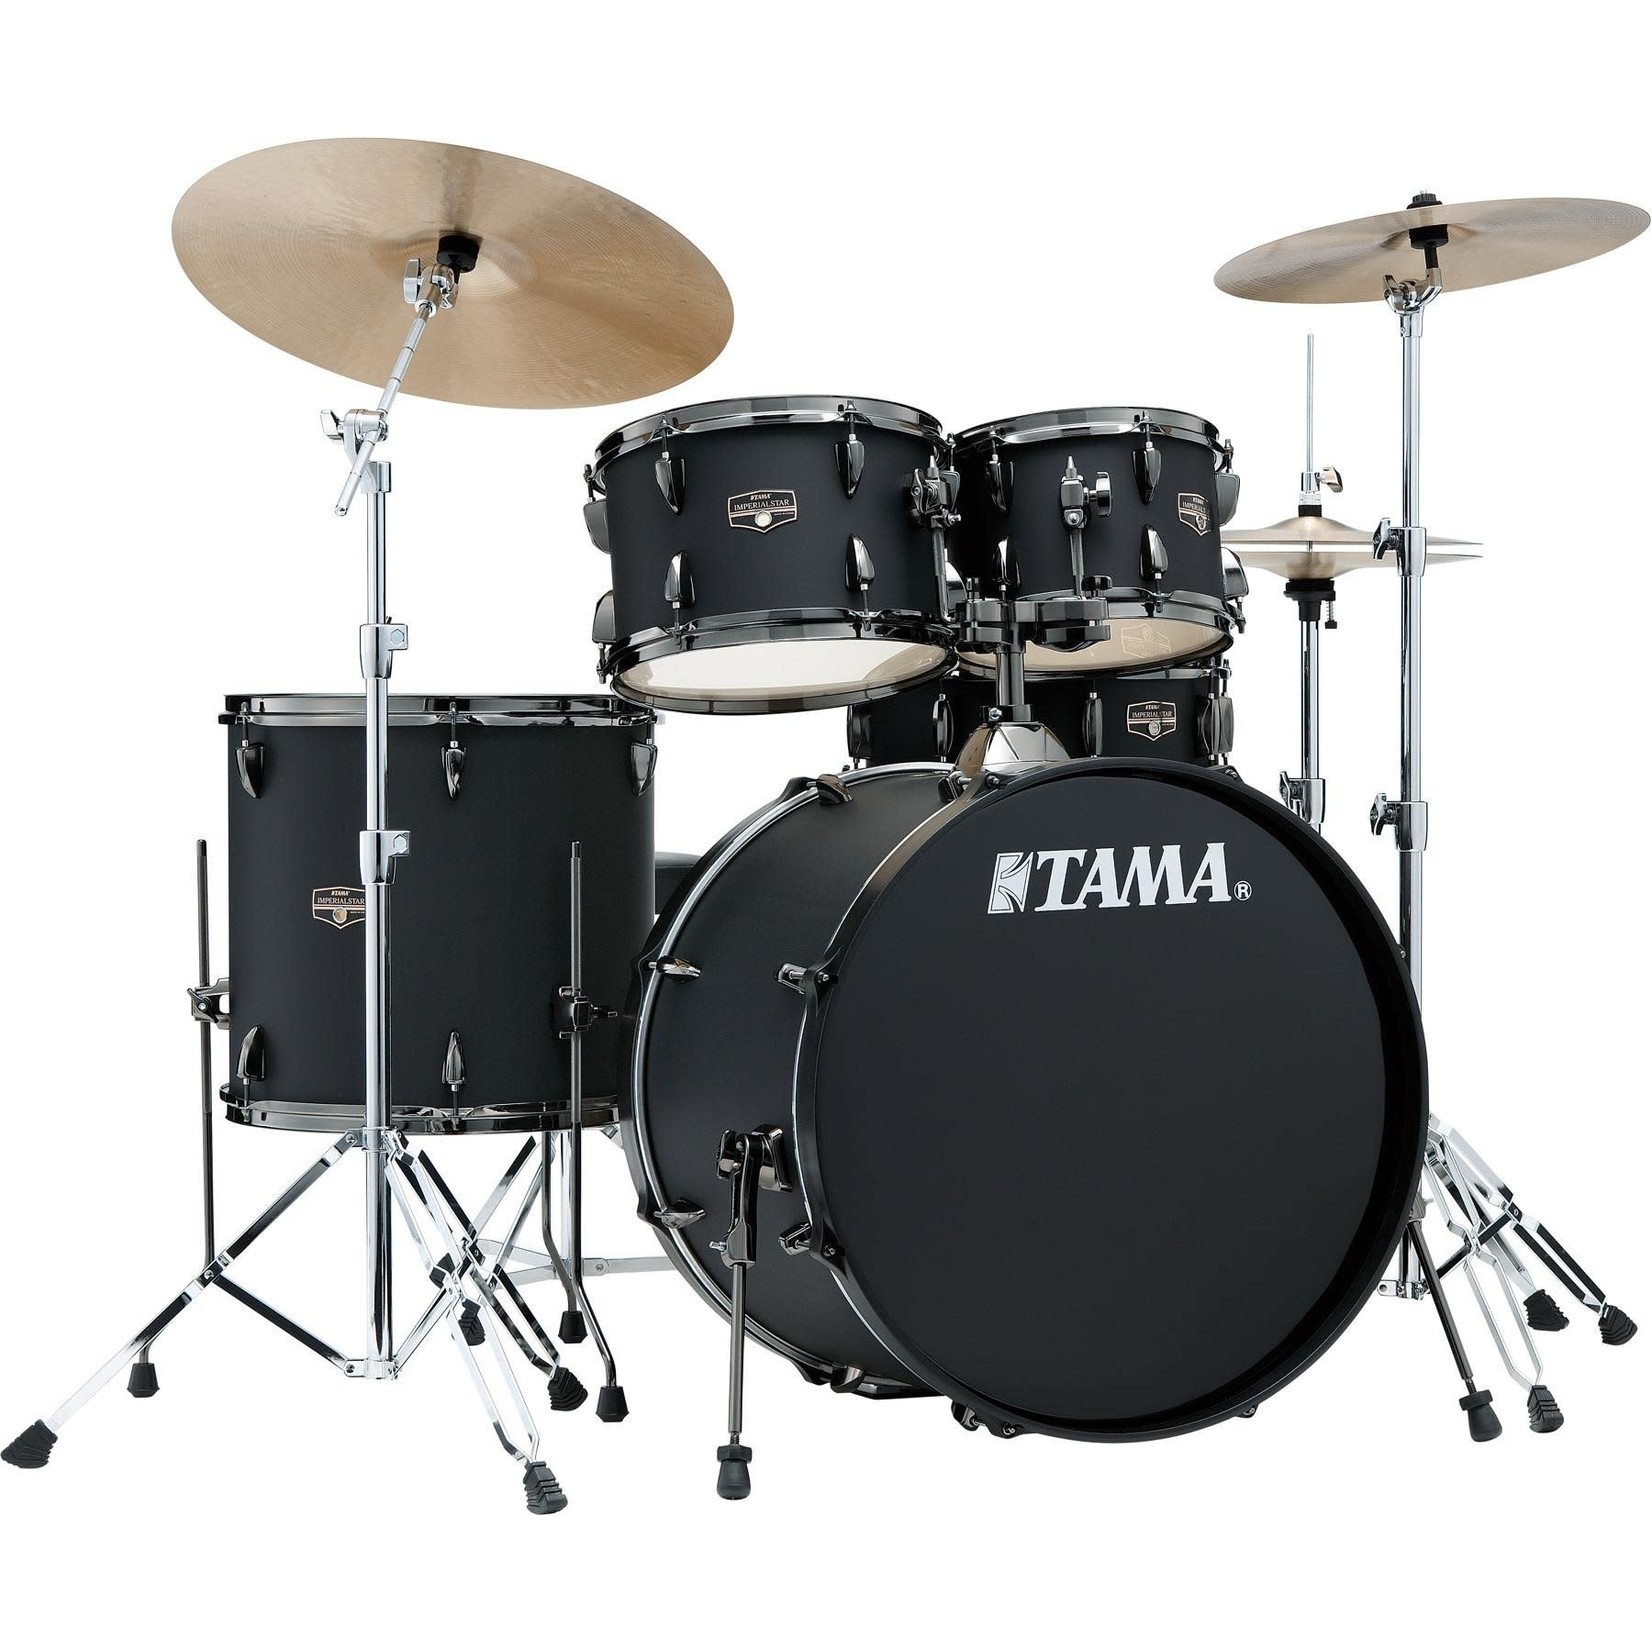 Tama TAMA IMPERIALSTAR 5PC COMPLETE KIT W/ CYMBALS & HARDWARE IE52C (BLACKED OUT BLACK)